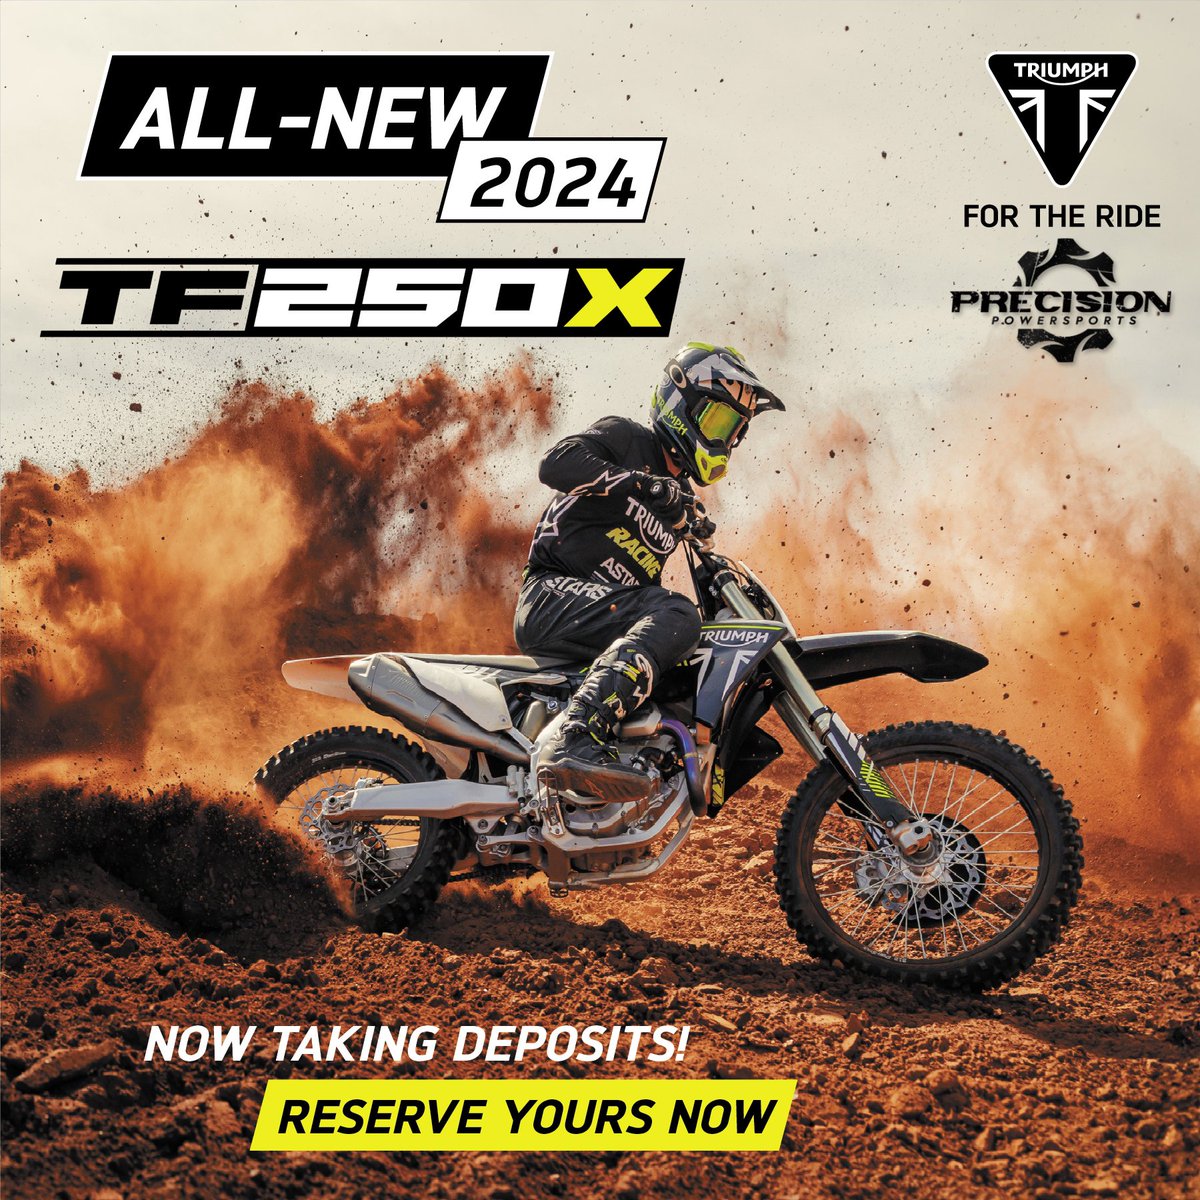 The ALL-NEW TF 250-X. The perfect balance of performance, agility, and mass.

Taking deposits now!

#ForTheRide #TriumphMotorcycles #TriumphMotocross #TF250X #TriumphTF250X